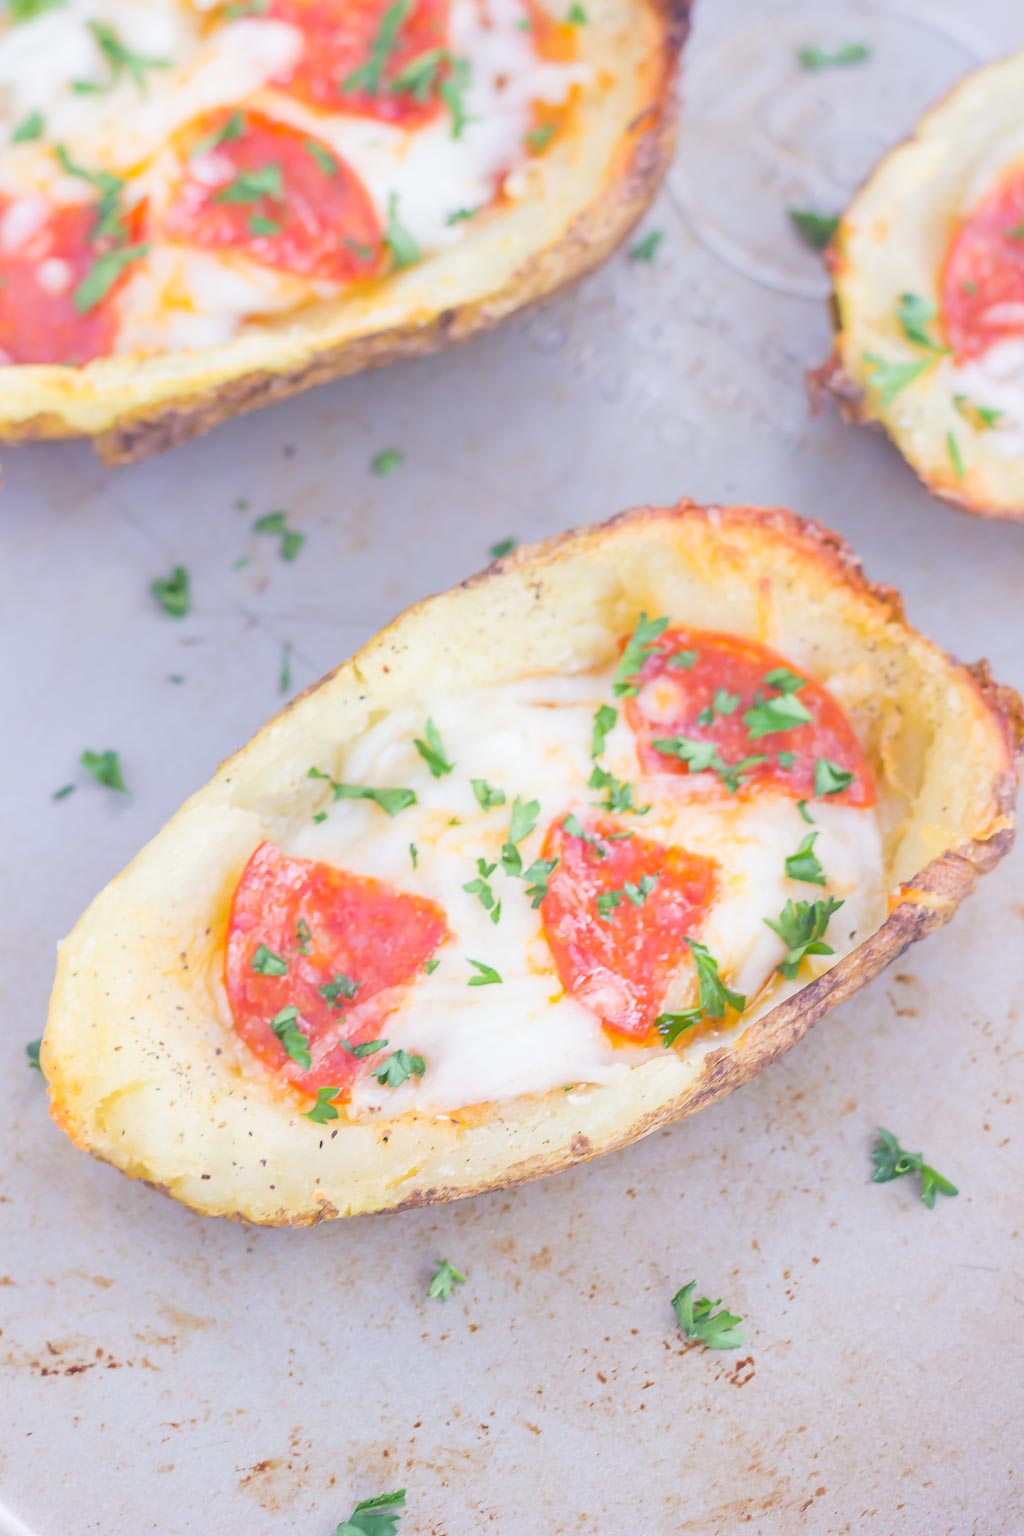 Loaded with pizza sauce, fresh mozzarella cheese, pepperoni and seasonings, these Pizza Potato Skins are sure to be a crowd-pleasing appetizer or snack!